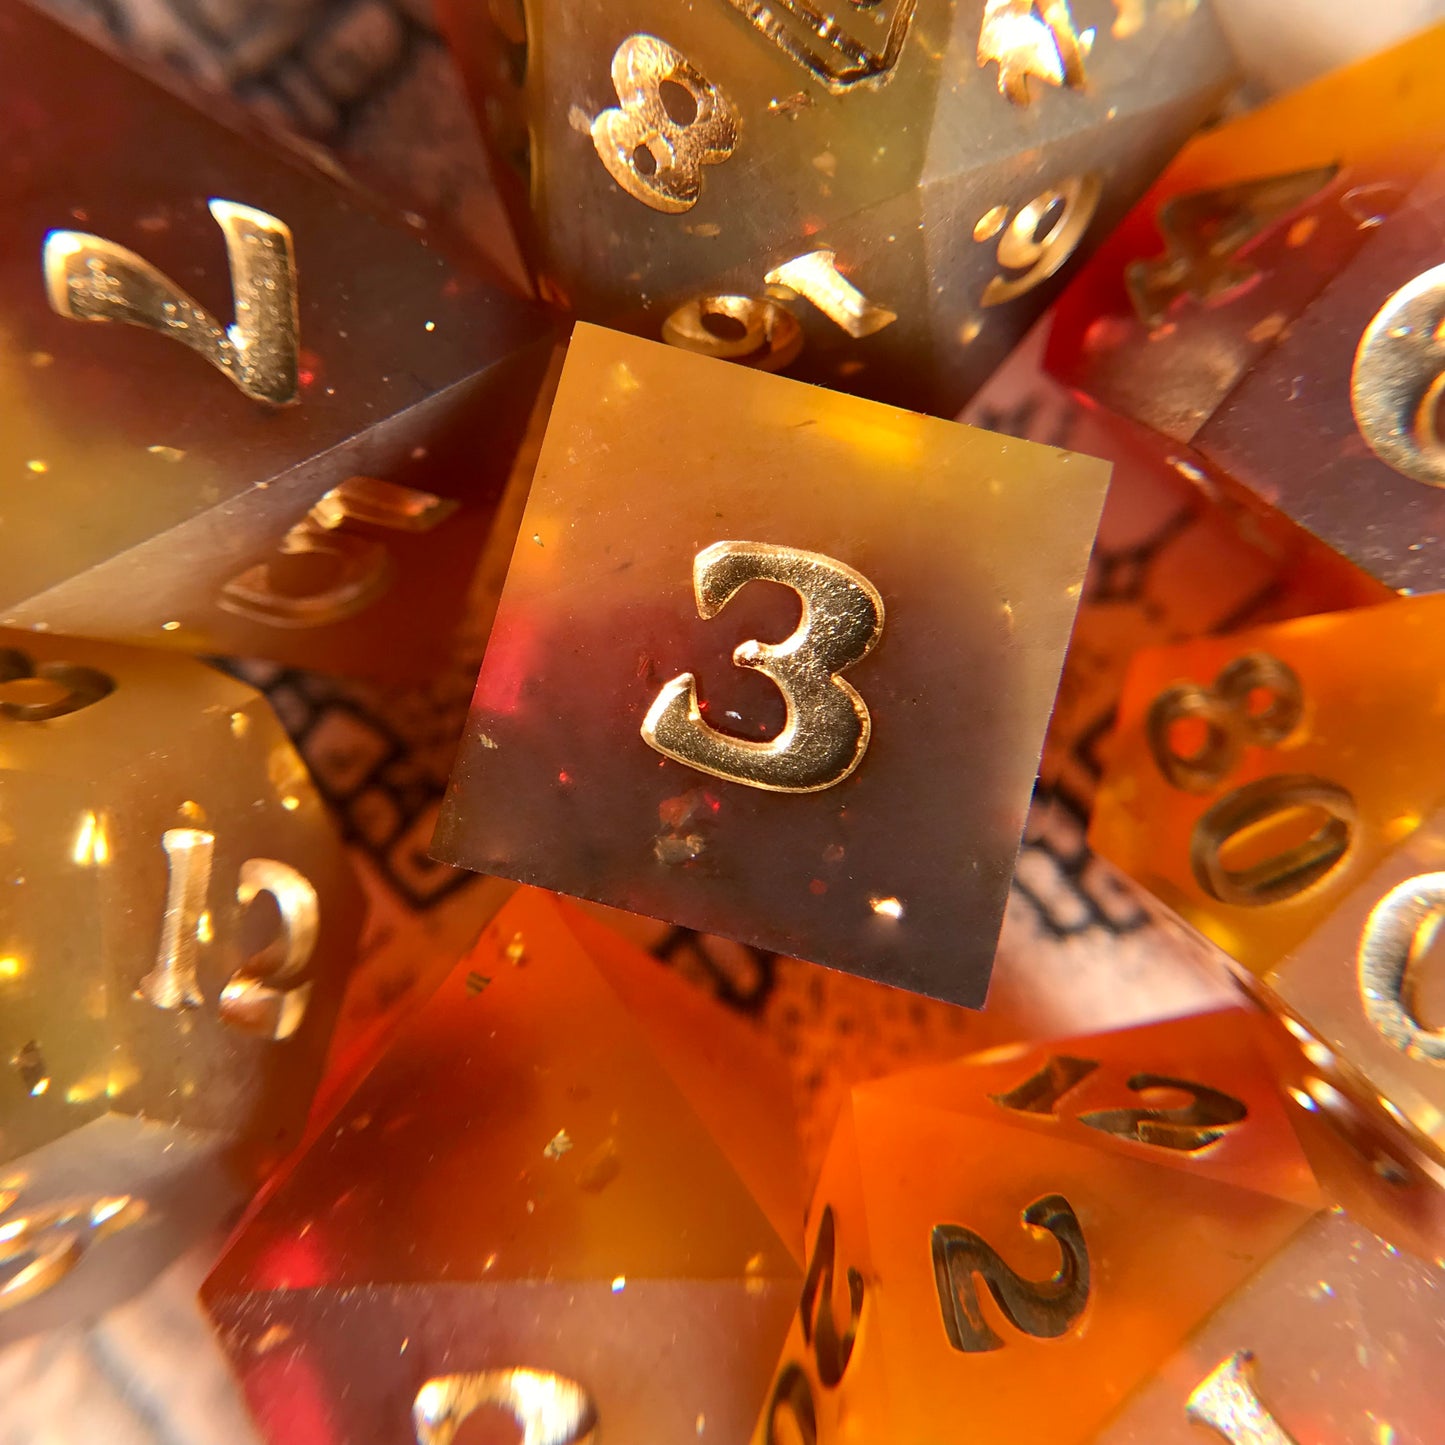 The Promised – 7-piece Polyhedral Dice Set